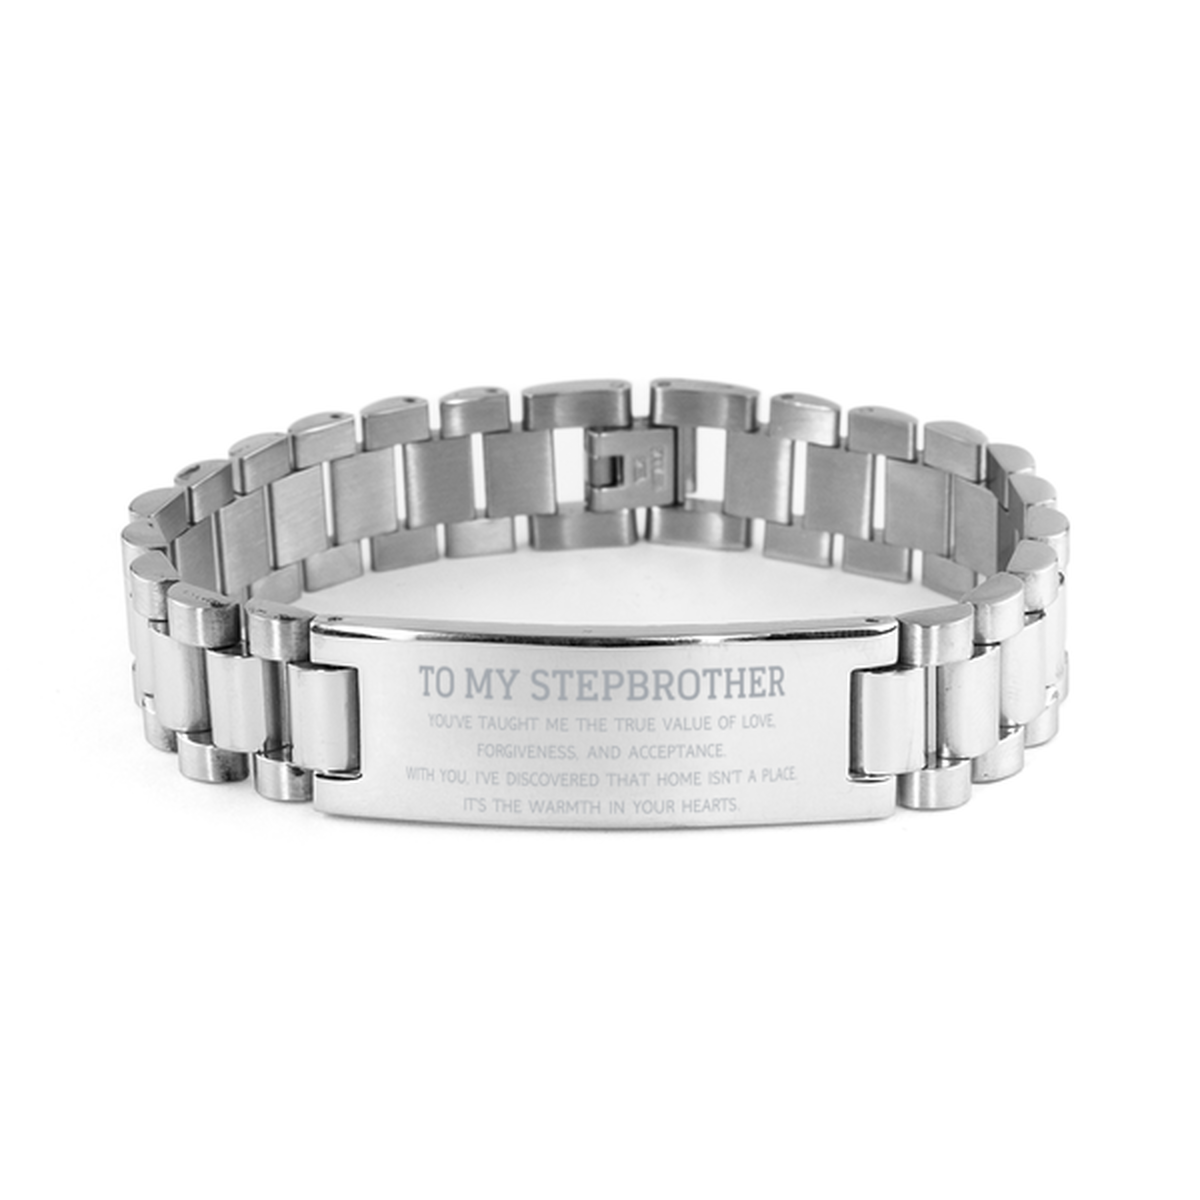 To My Stepbrother Gifts, You've taught me the true value of love, Thank You Gifts For Stepbrother, Birthday Ladder Stainless Steel Bracelet For Stepbrother